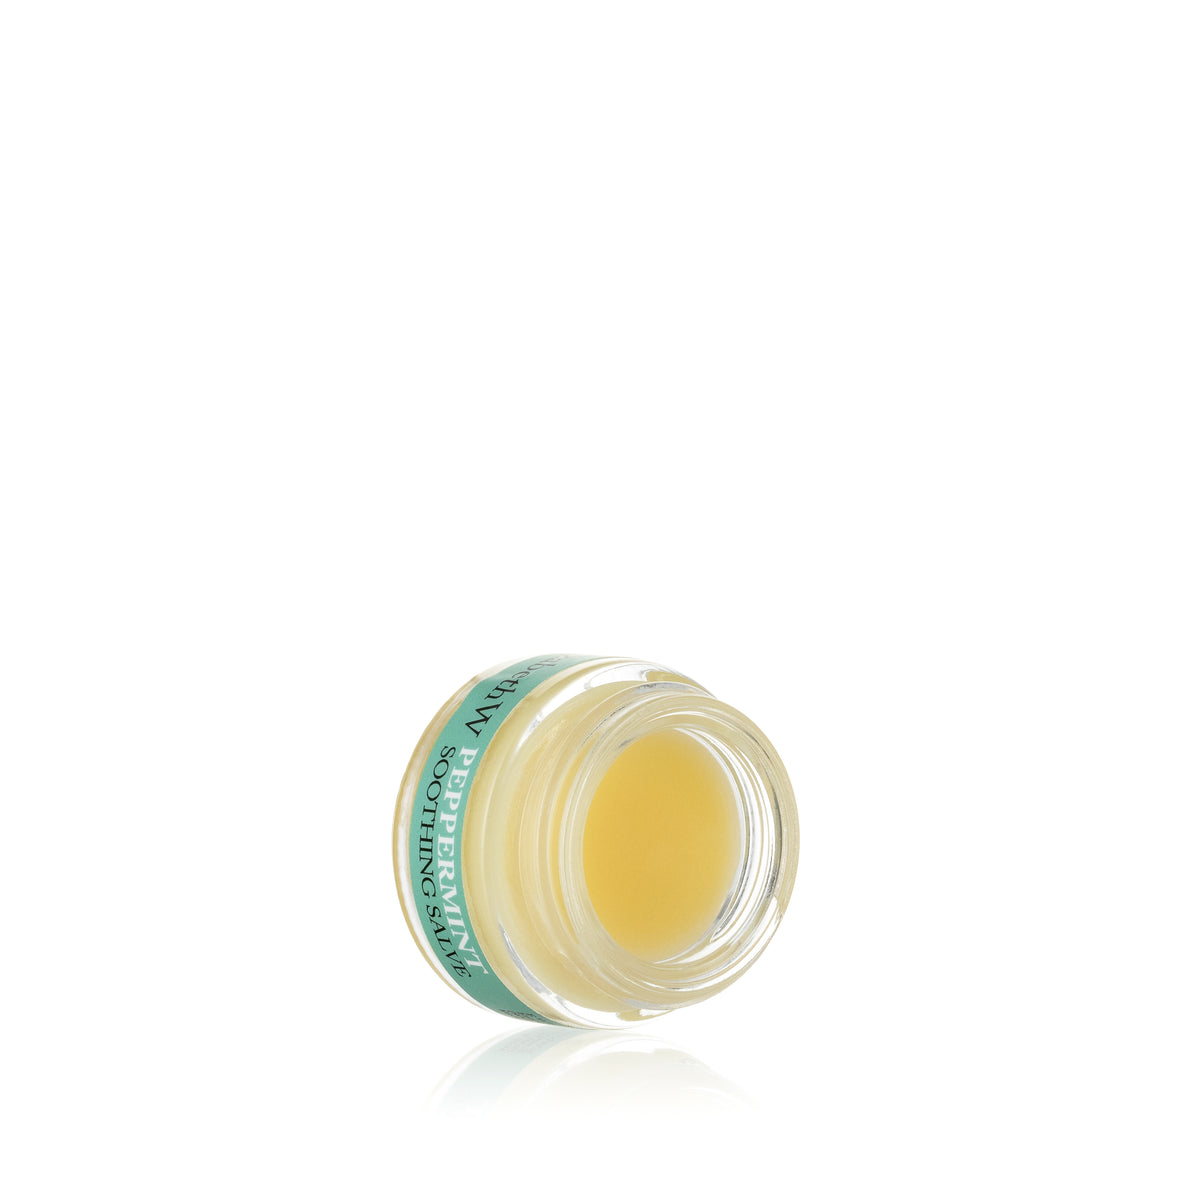 Peppermint Soothing Salve